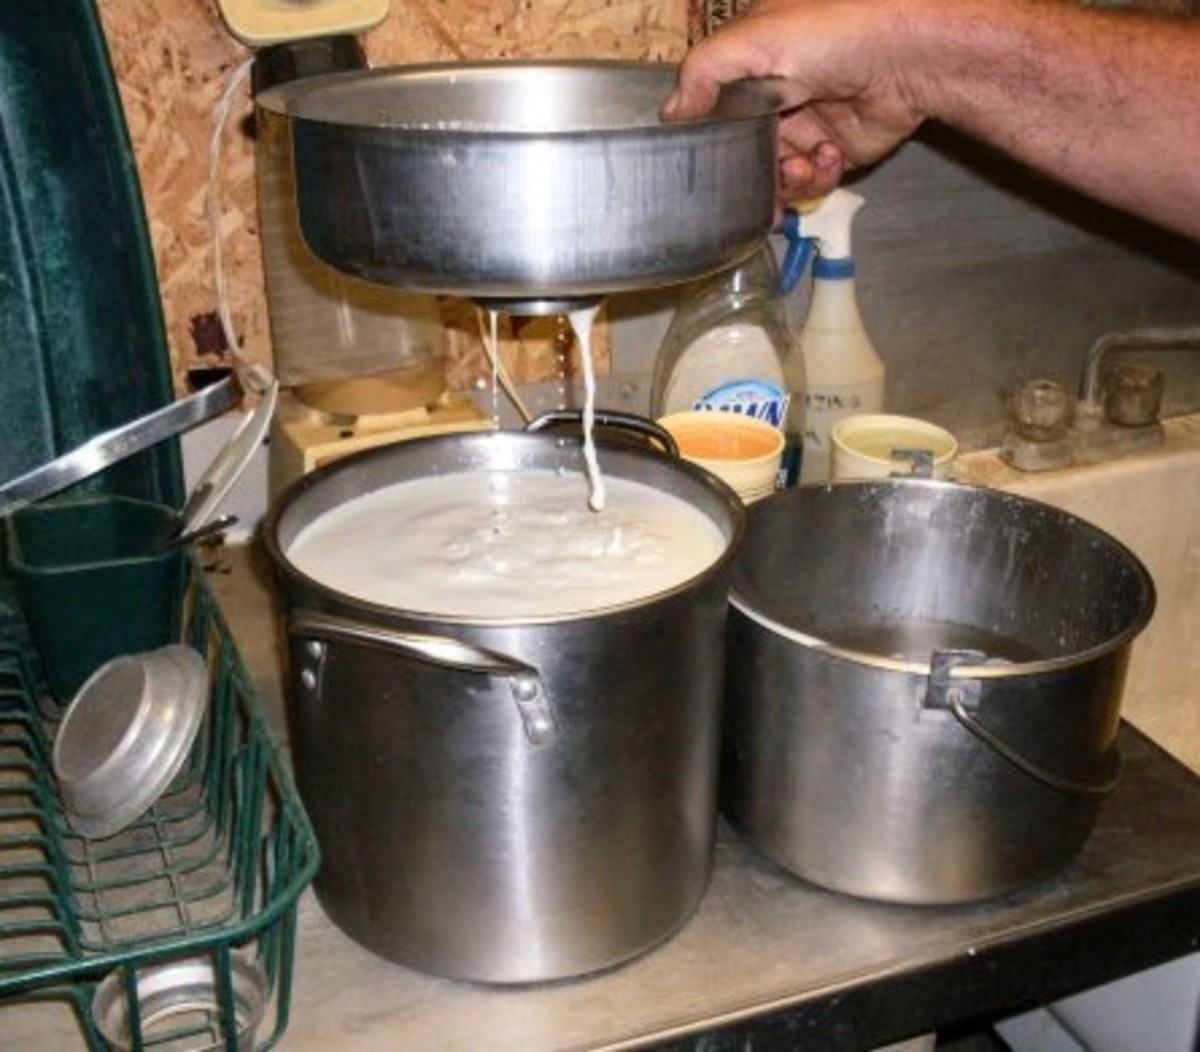 He likes to get the pots full enough for most of the cream to stick to the lids, as this simplifies skimming the milk.